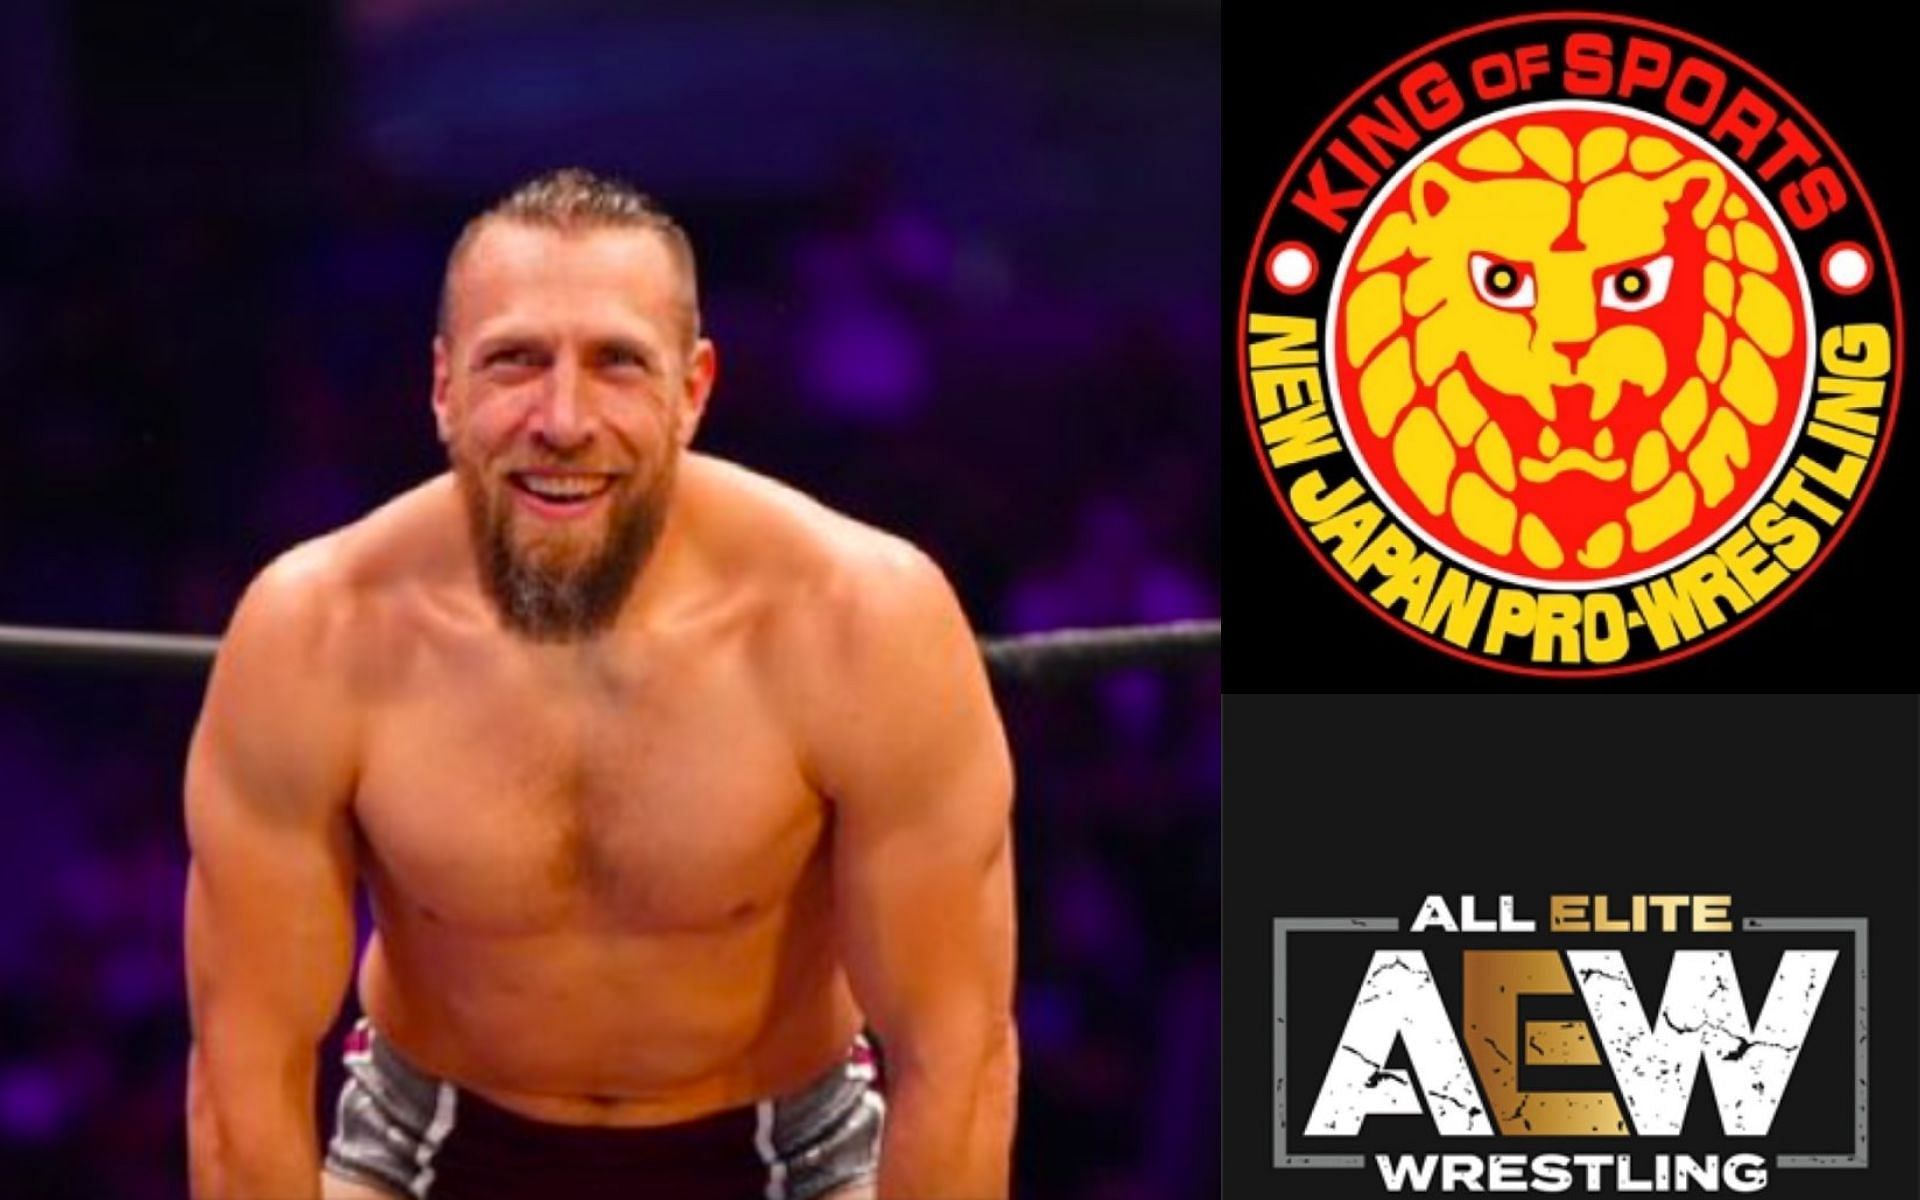 This NJPW star recently challenged AEW&#039;s Bryan Danielson last night at Dominion.